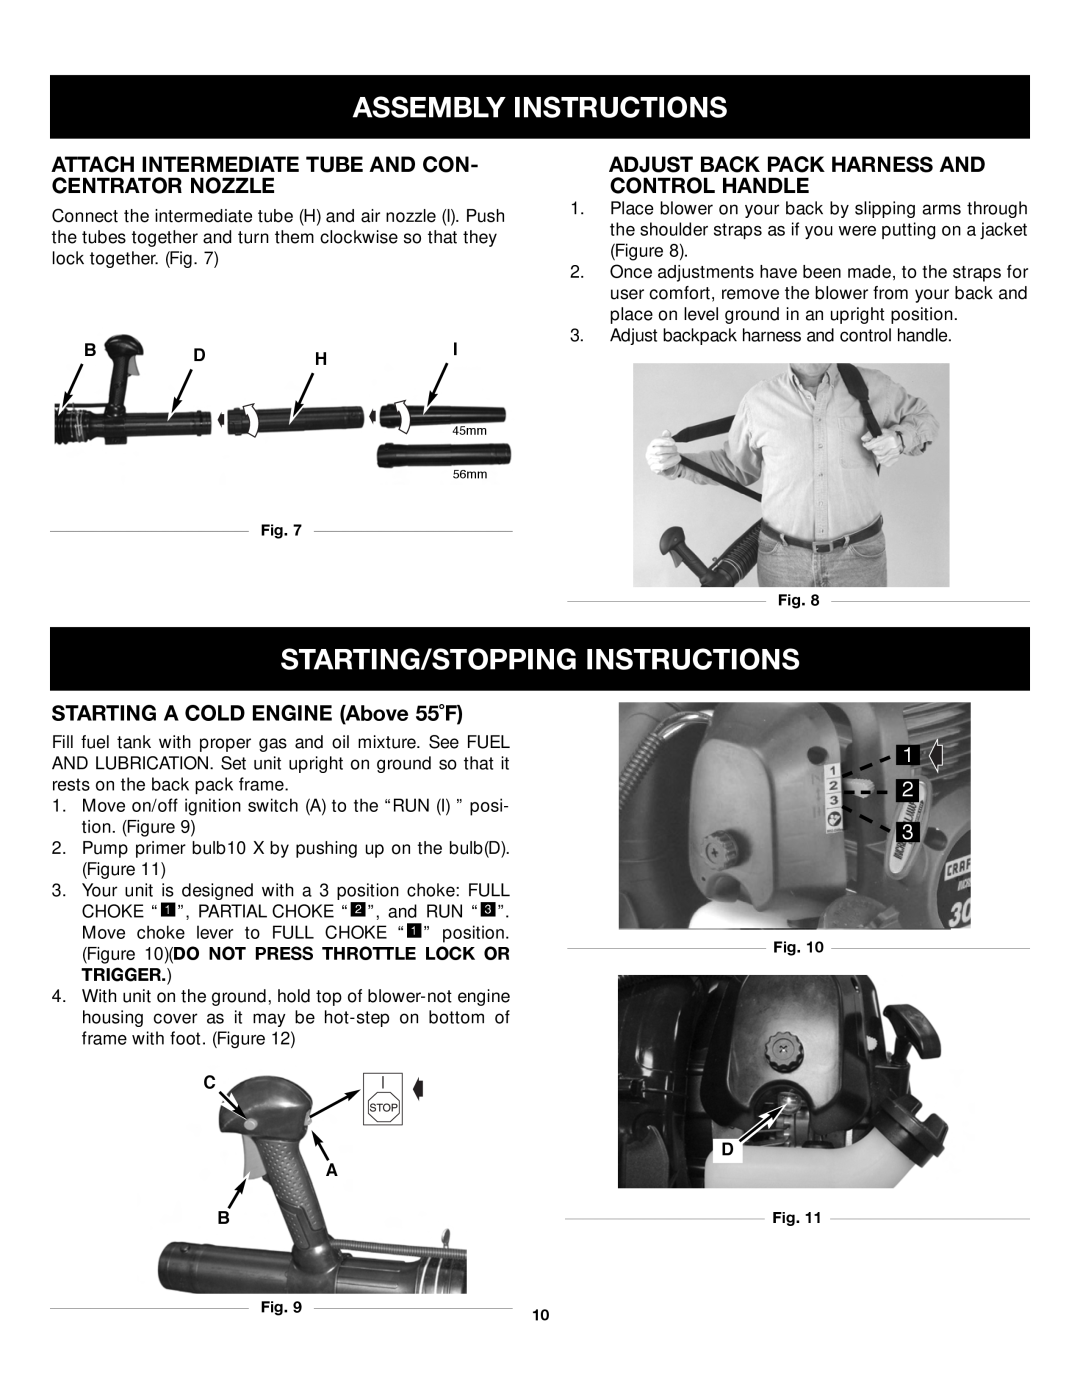 Craftsman 316.79499 Starting/Stopping Instructions, Attach Intermediate Tube And Con- Centrator Nozzle, B D Hi, C A B 